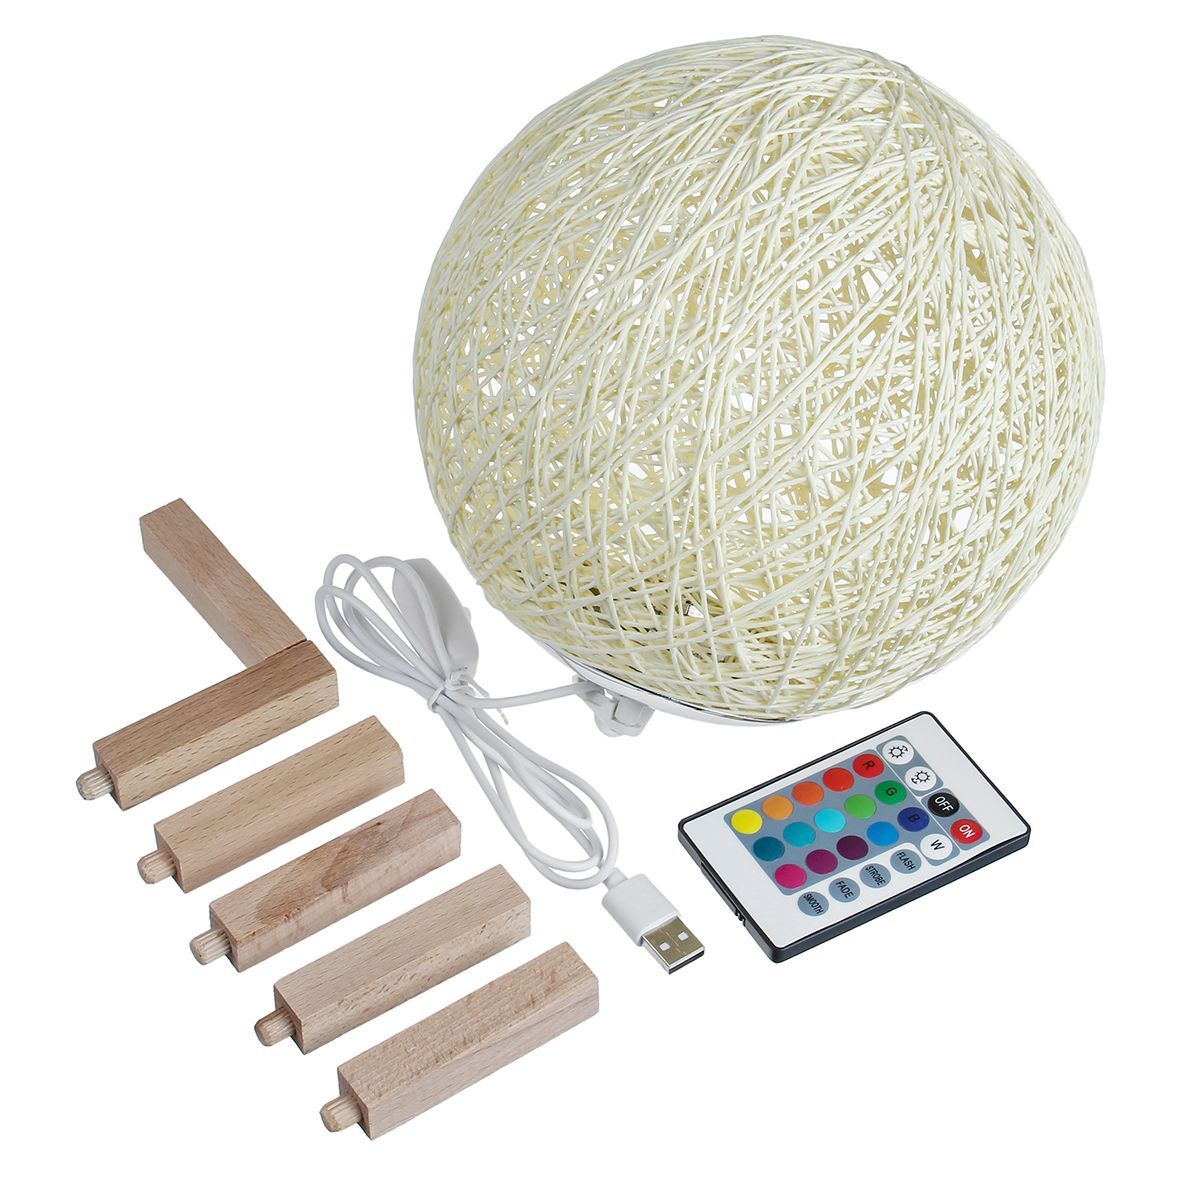 USB-Wooden-Rattan-Table-Light-Dimming-Desk-Bedroom-Night-LED-Ball-Home-Decorations-1627078